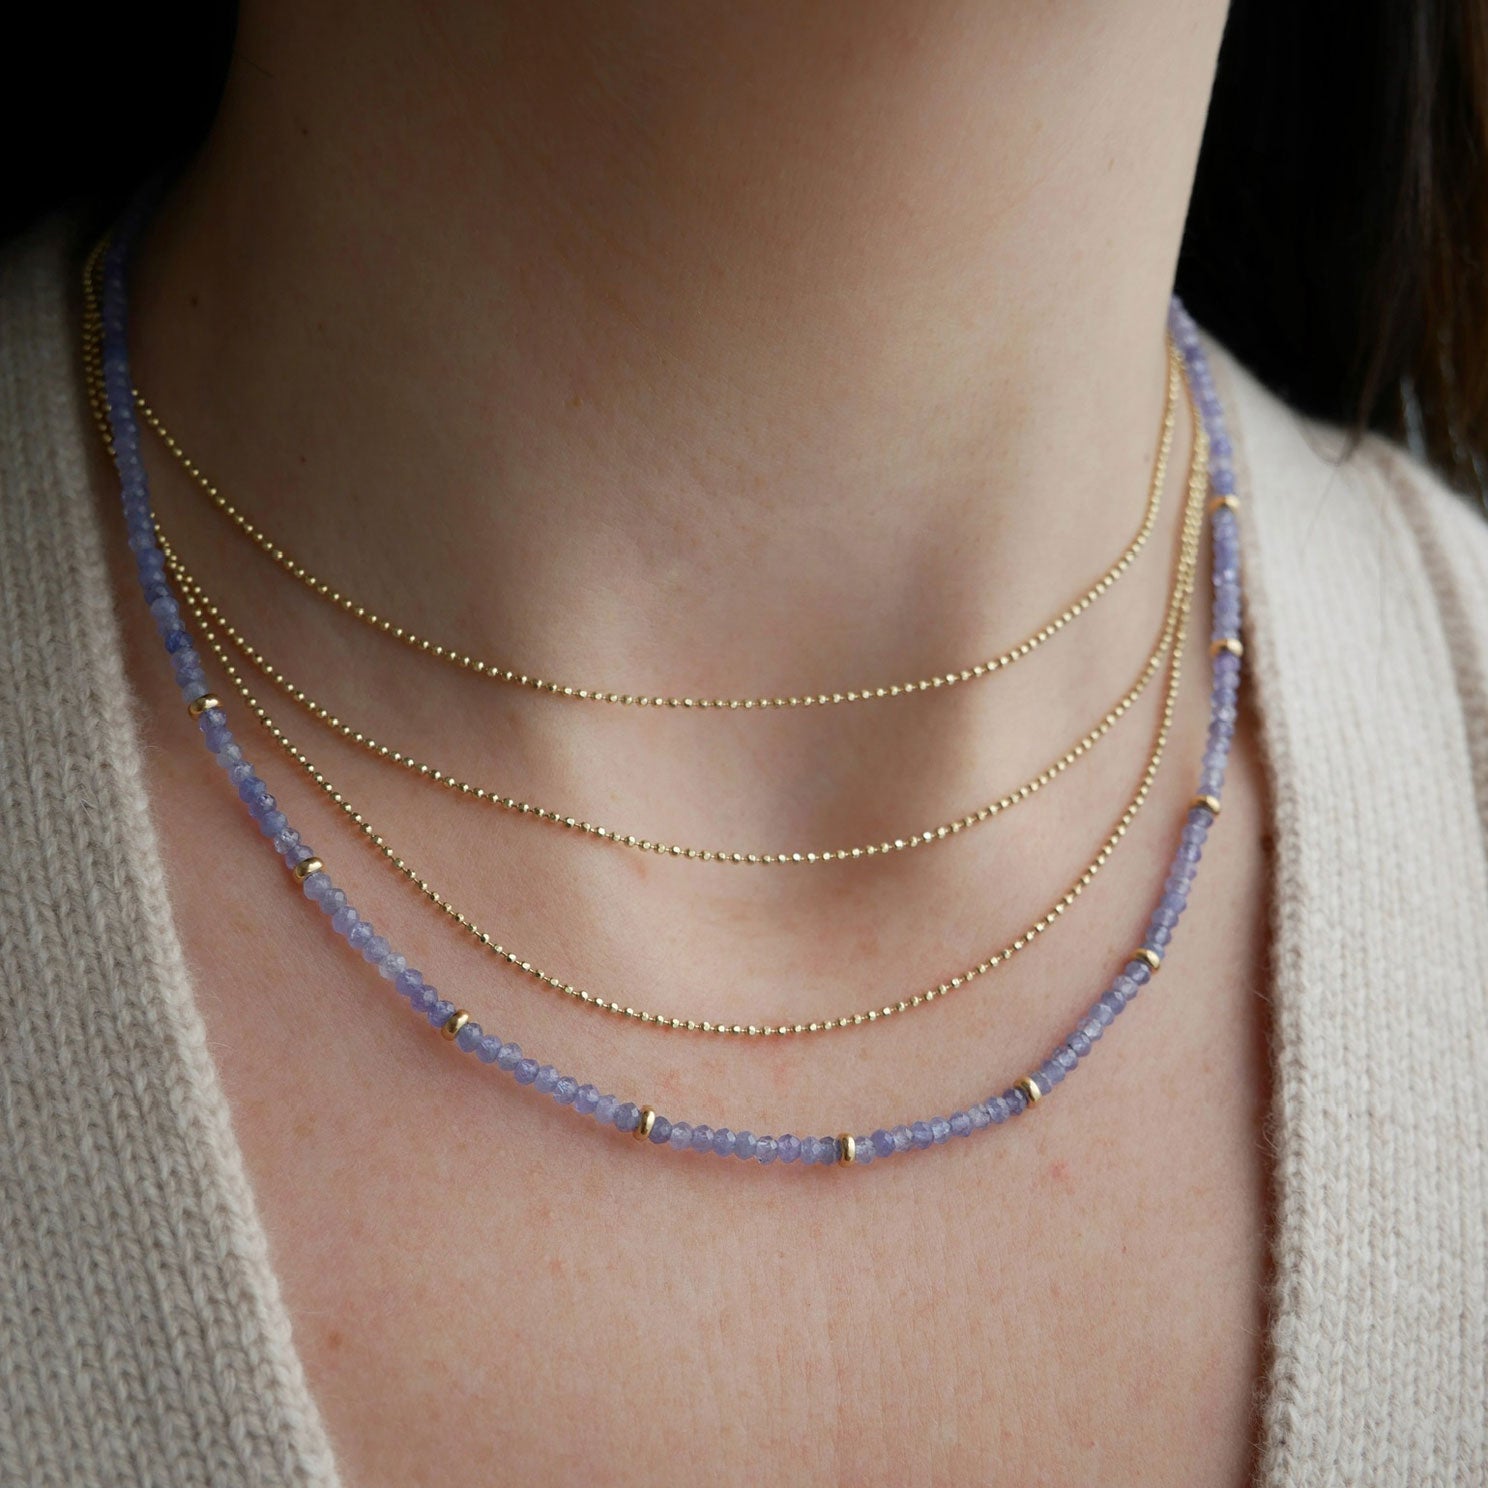 Birthstone Bead Necklace In Tanzanite styled on neck of model with gold layered necklace and wearing tan sweater